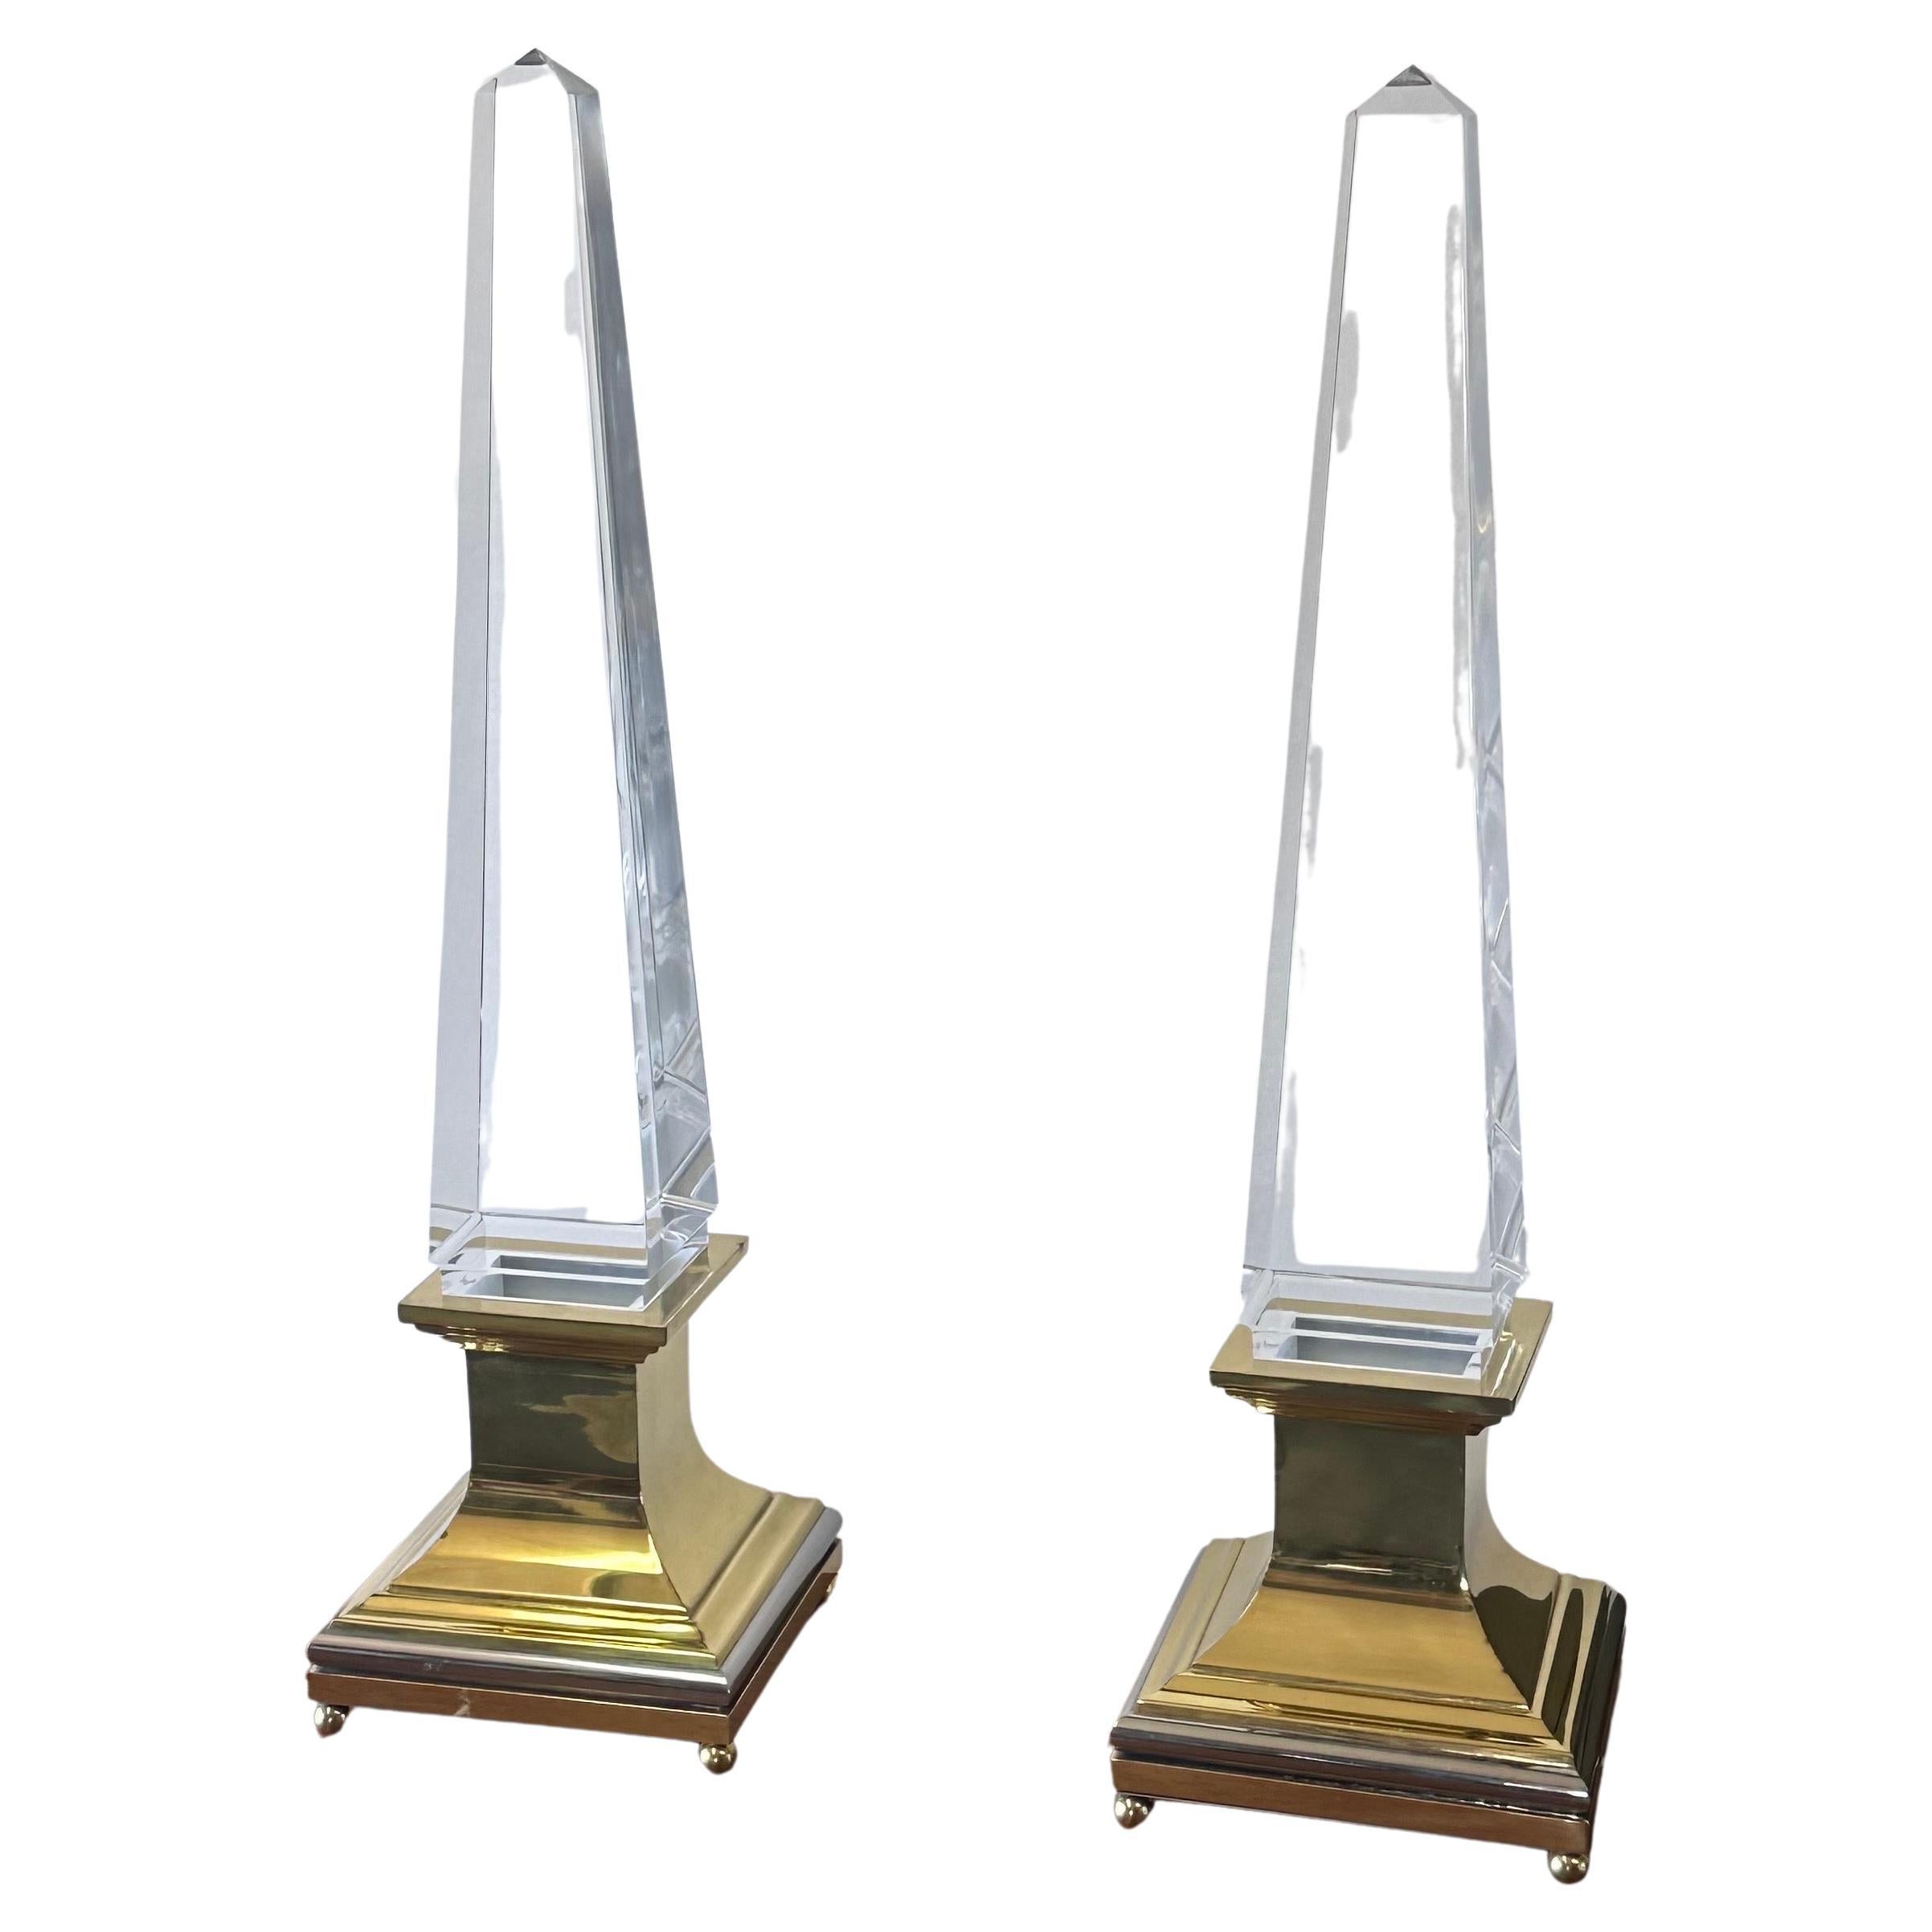 Elegant and gorgeous pair of lucite and brass obelisk table lamps by Italian architect and designer Sandro Petti for French retailer Maison Jansen, circa 1970s. These beautiful lamps are in very good vintage condition and measure 8.5